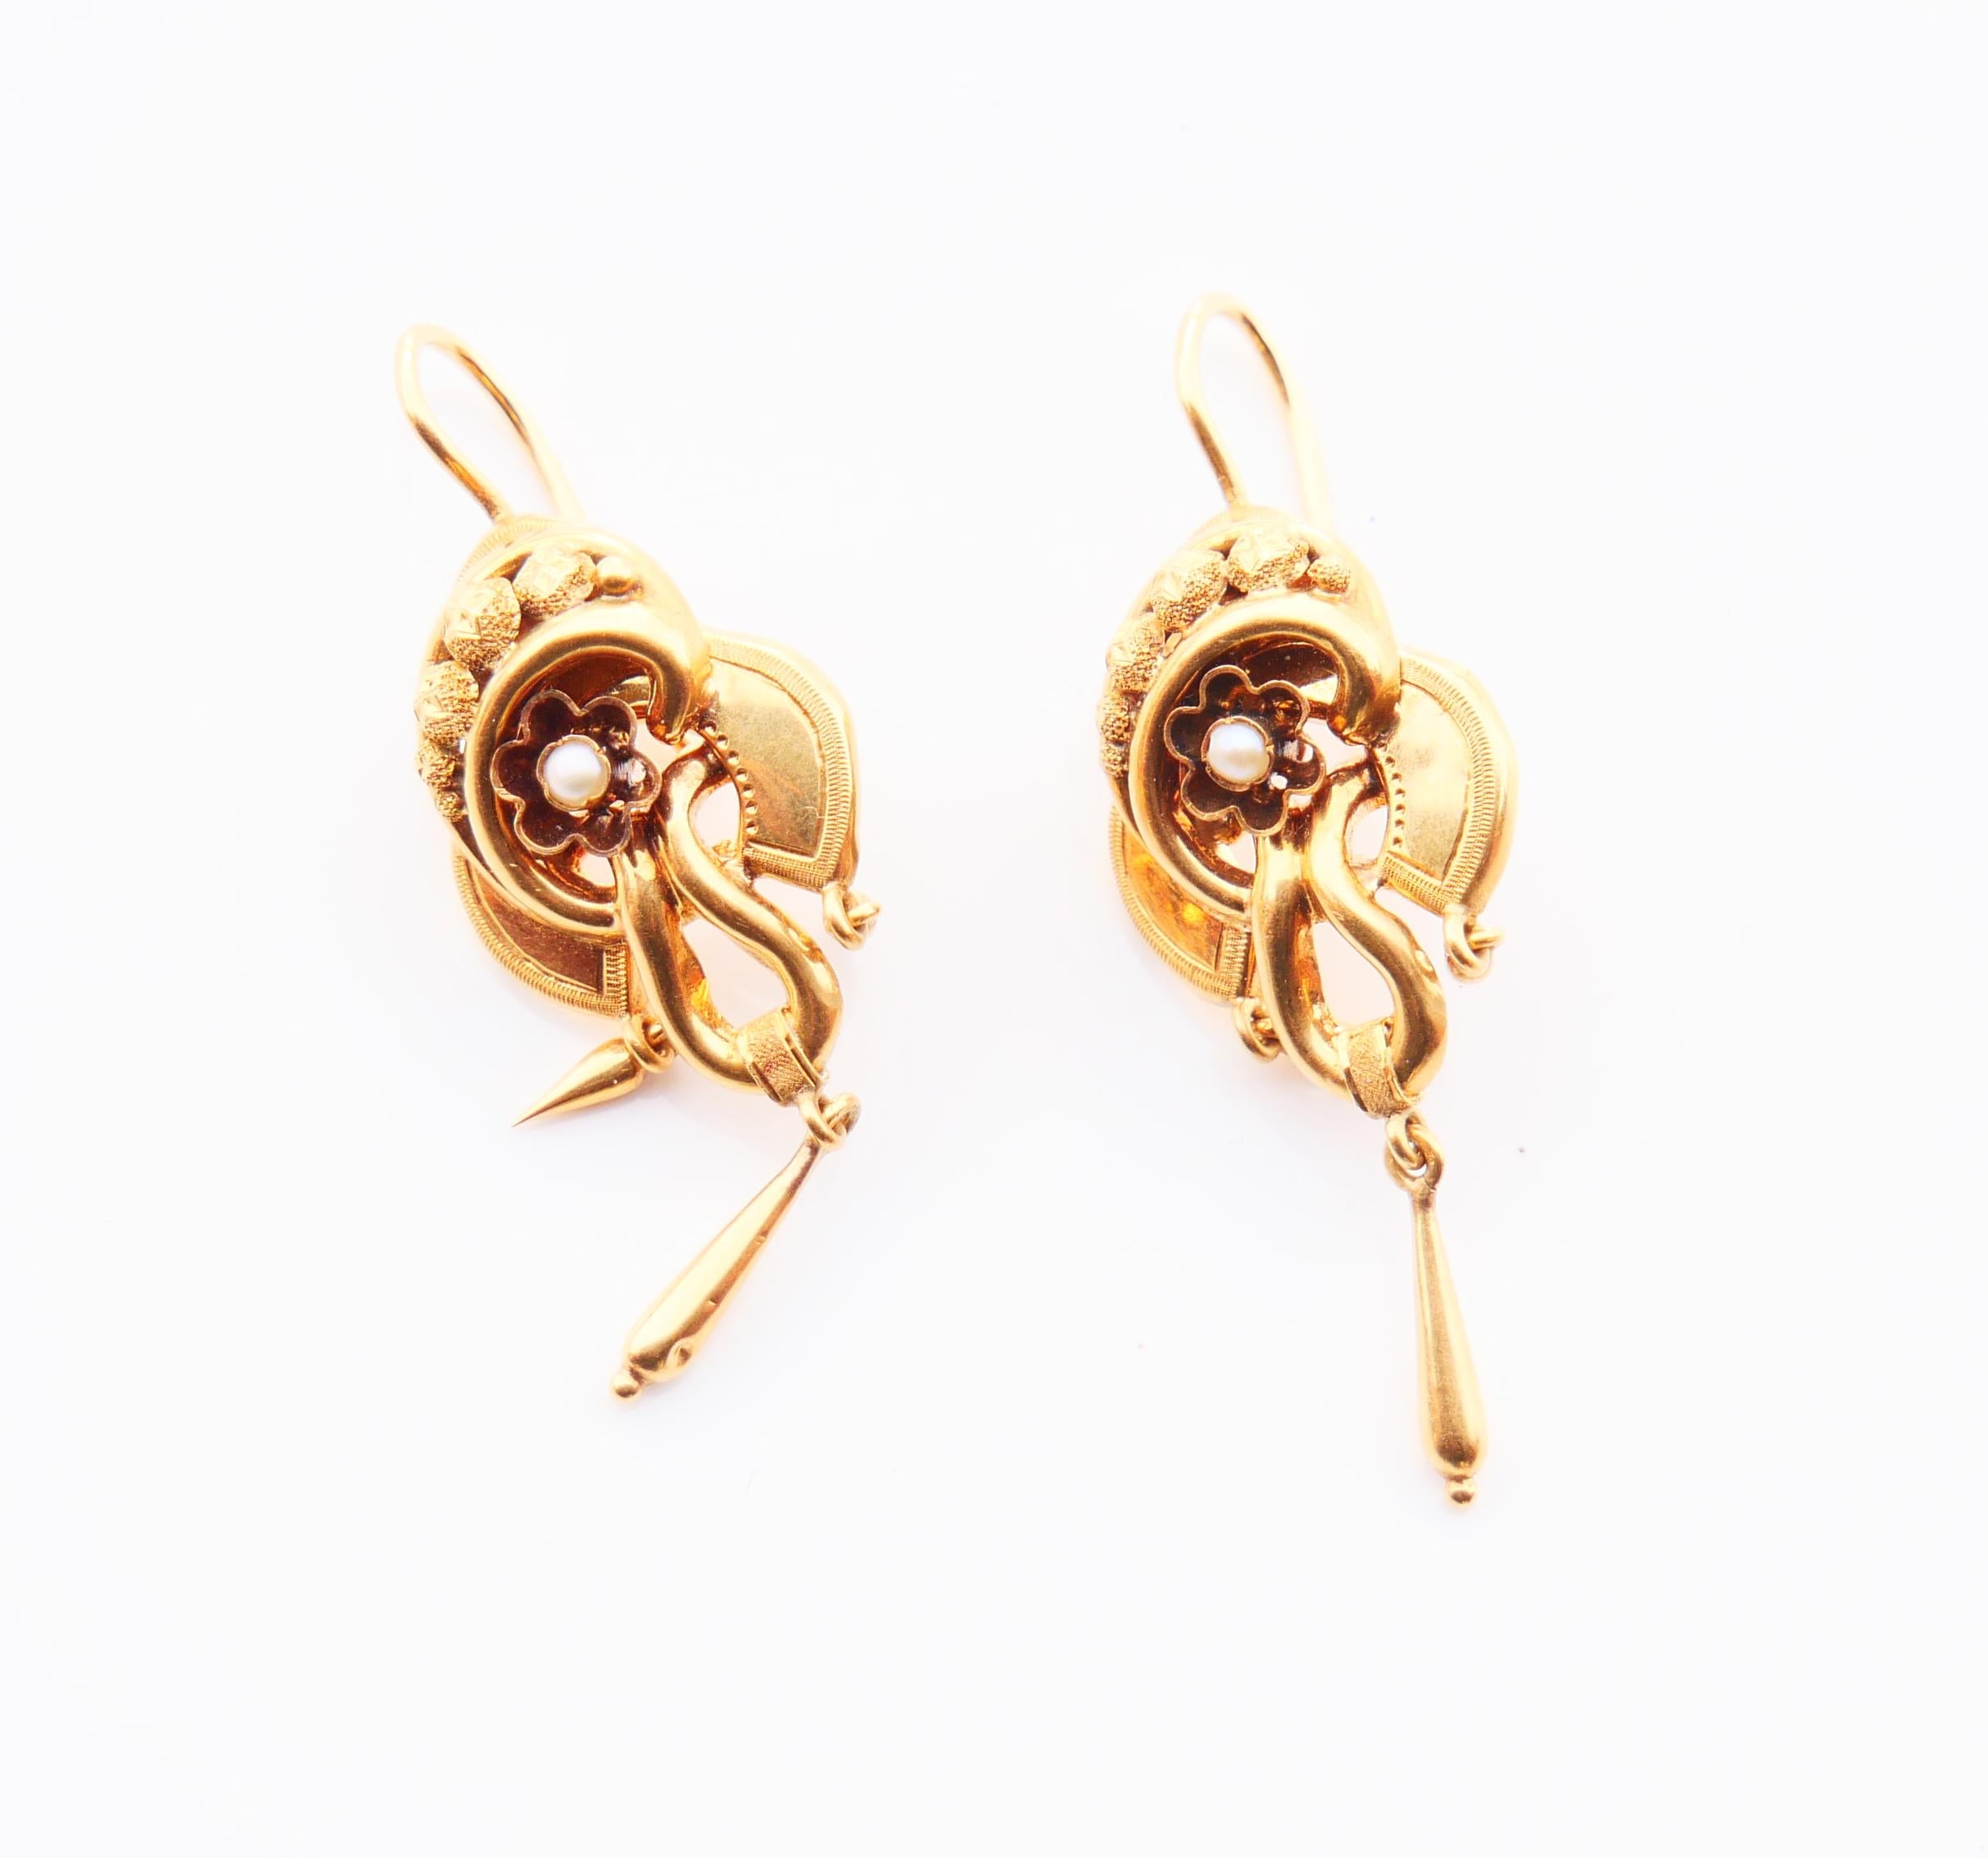 Empire 1871 Antique European Earrings solid 18K Gold Seed Pearls / 4.7gr For Sale